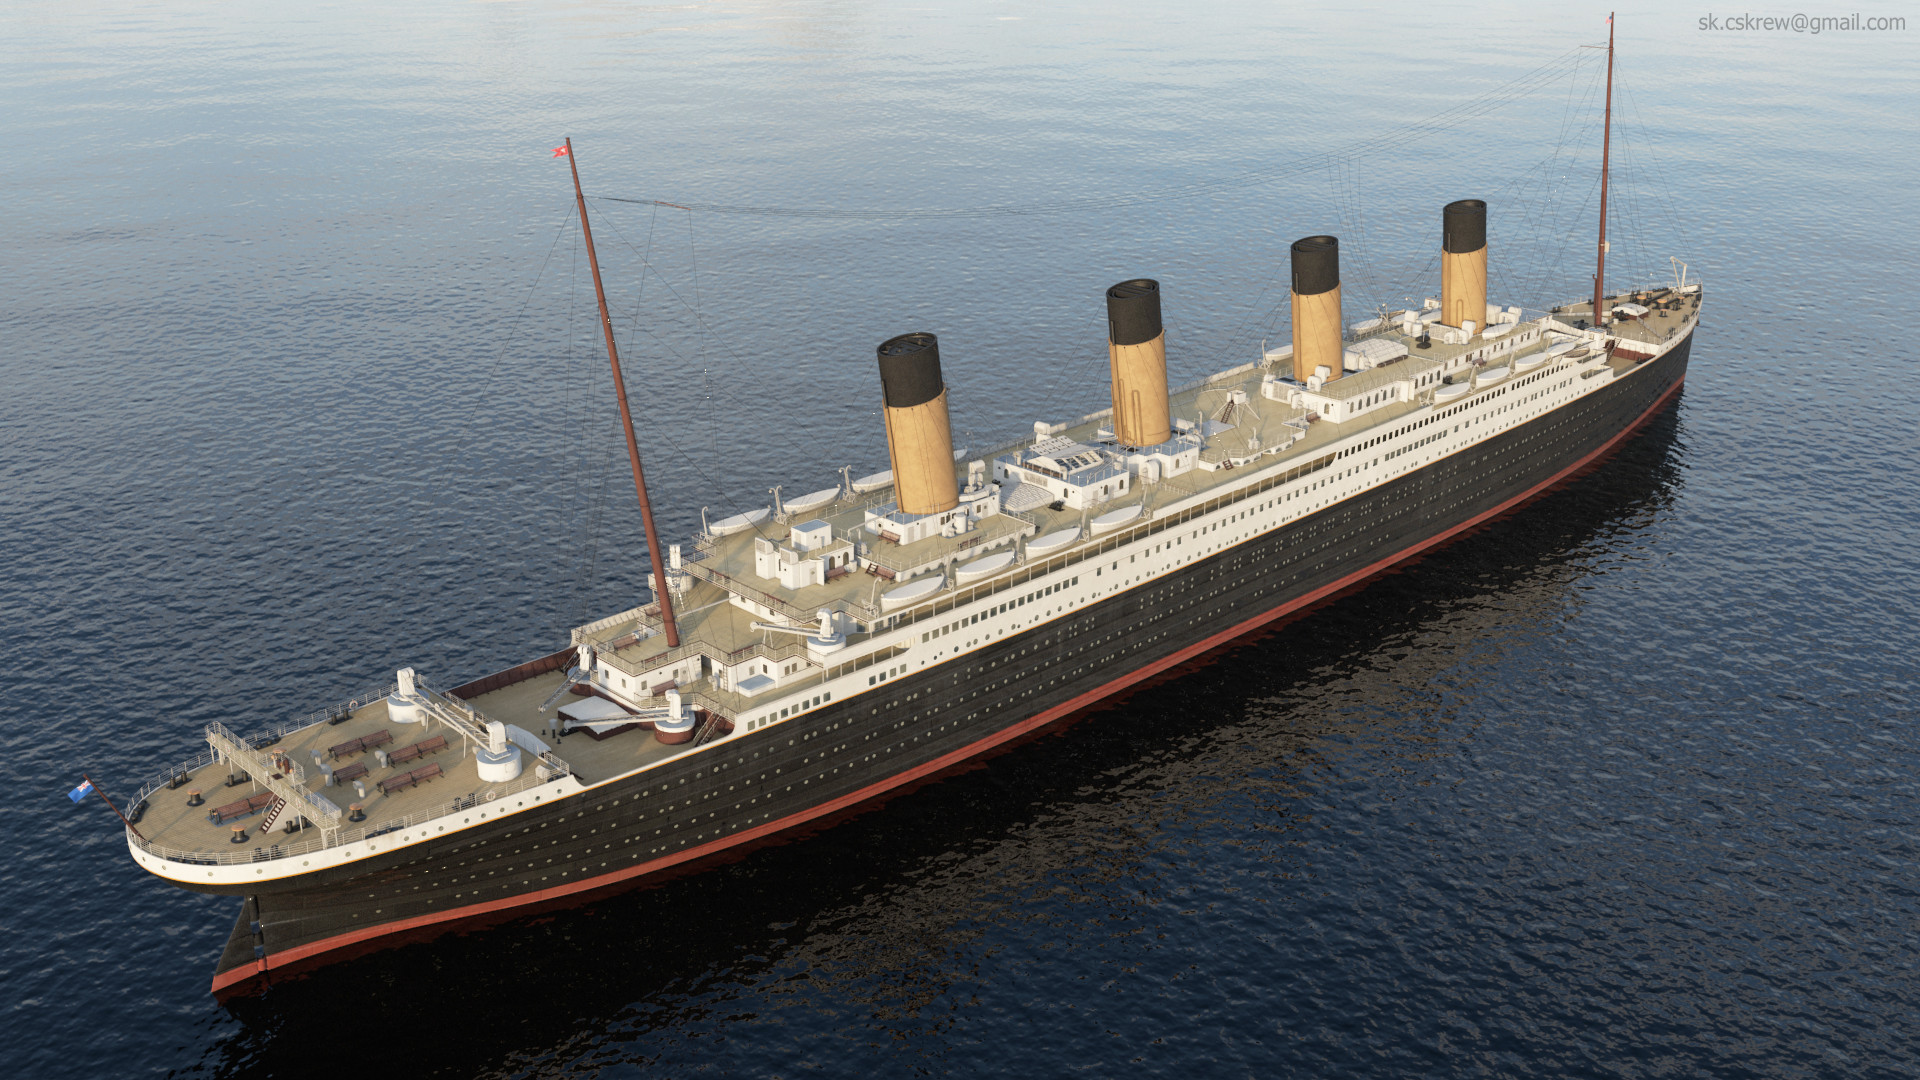 Render - Rms Titanic , HD Wallpaper & Backgrounds